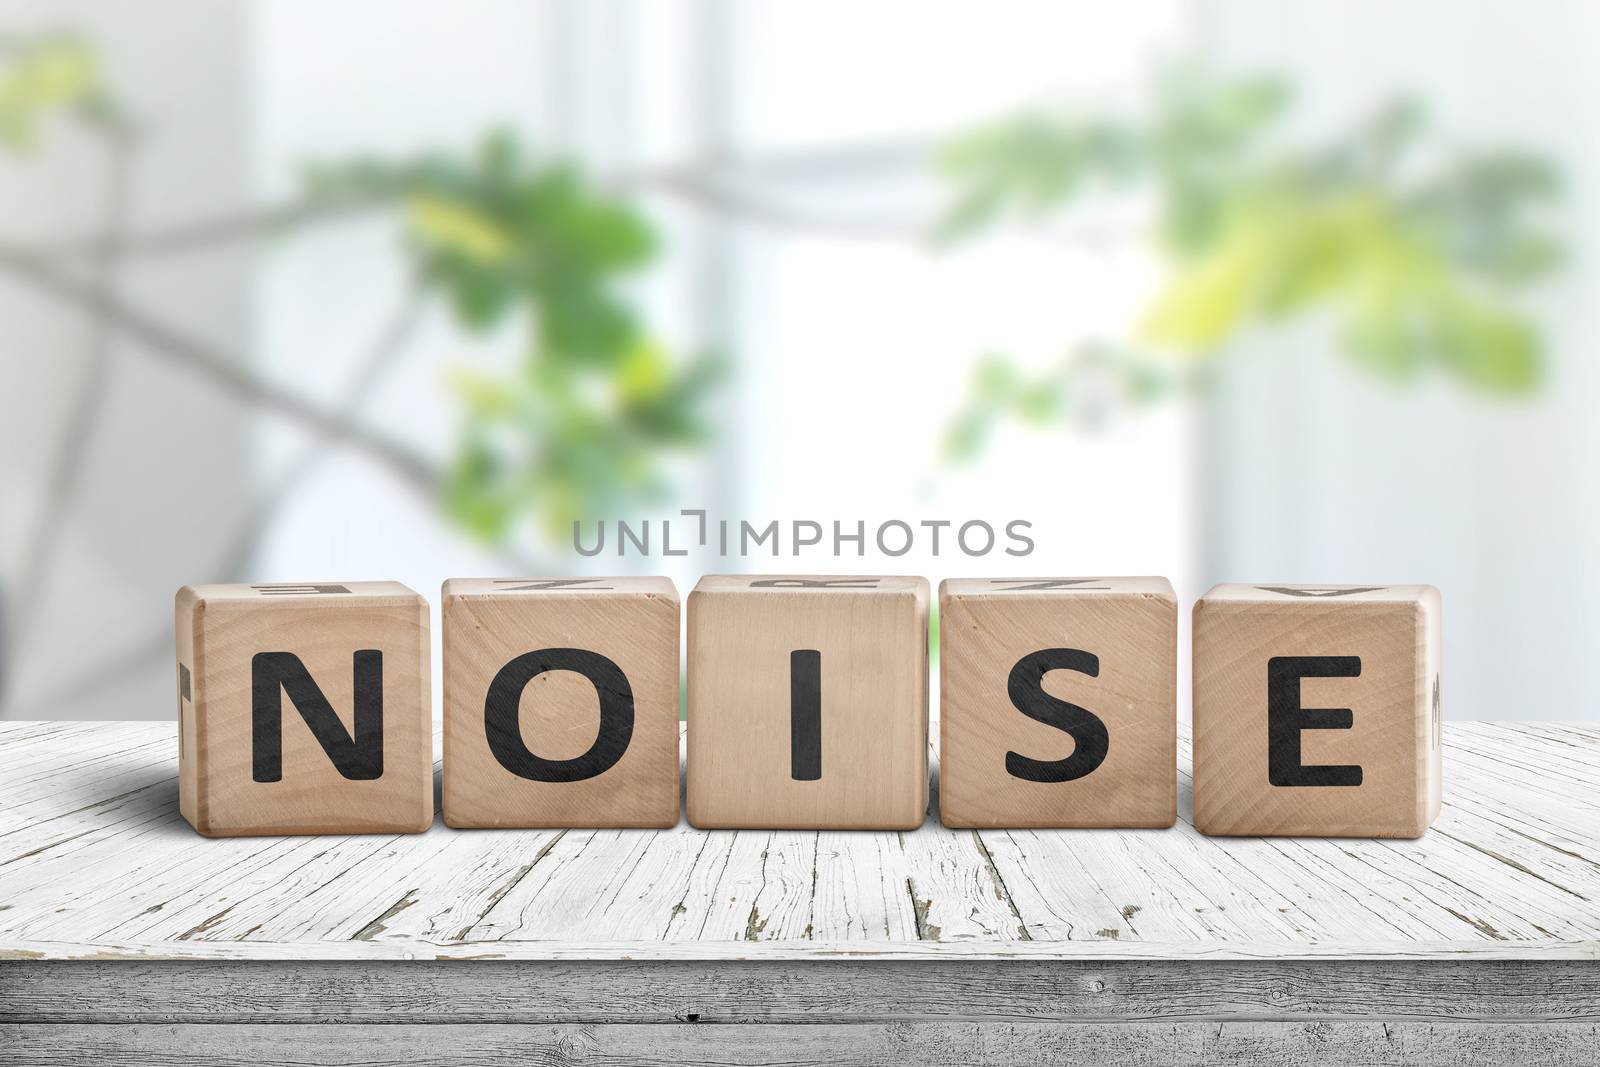 Noise sign made of wood in a bright room with green plants in daylight